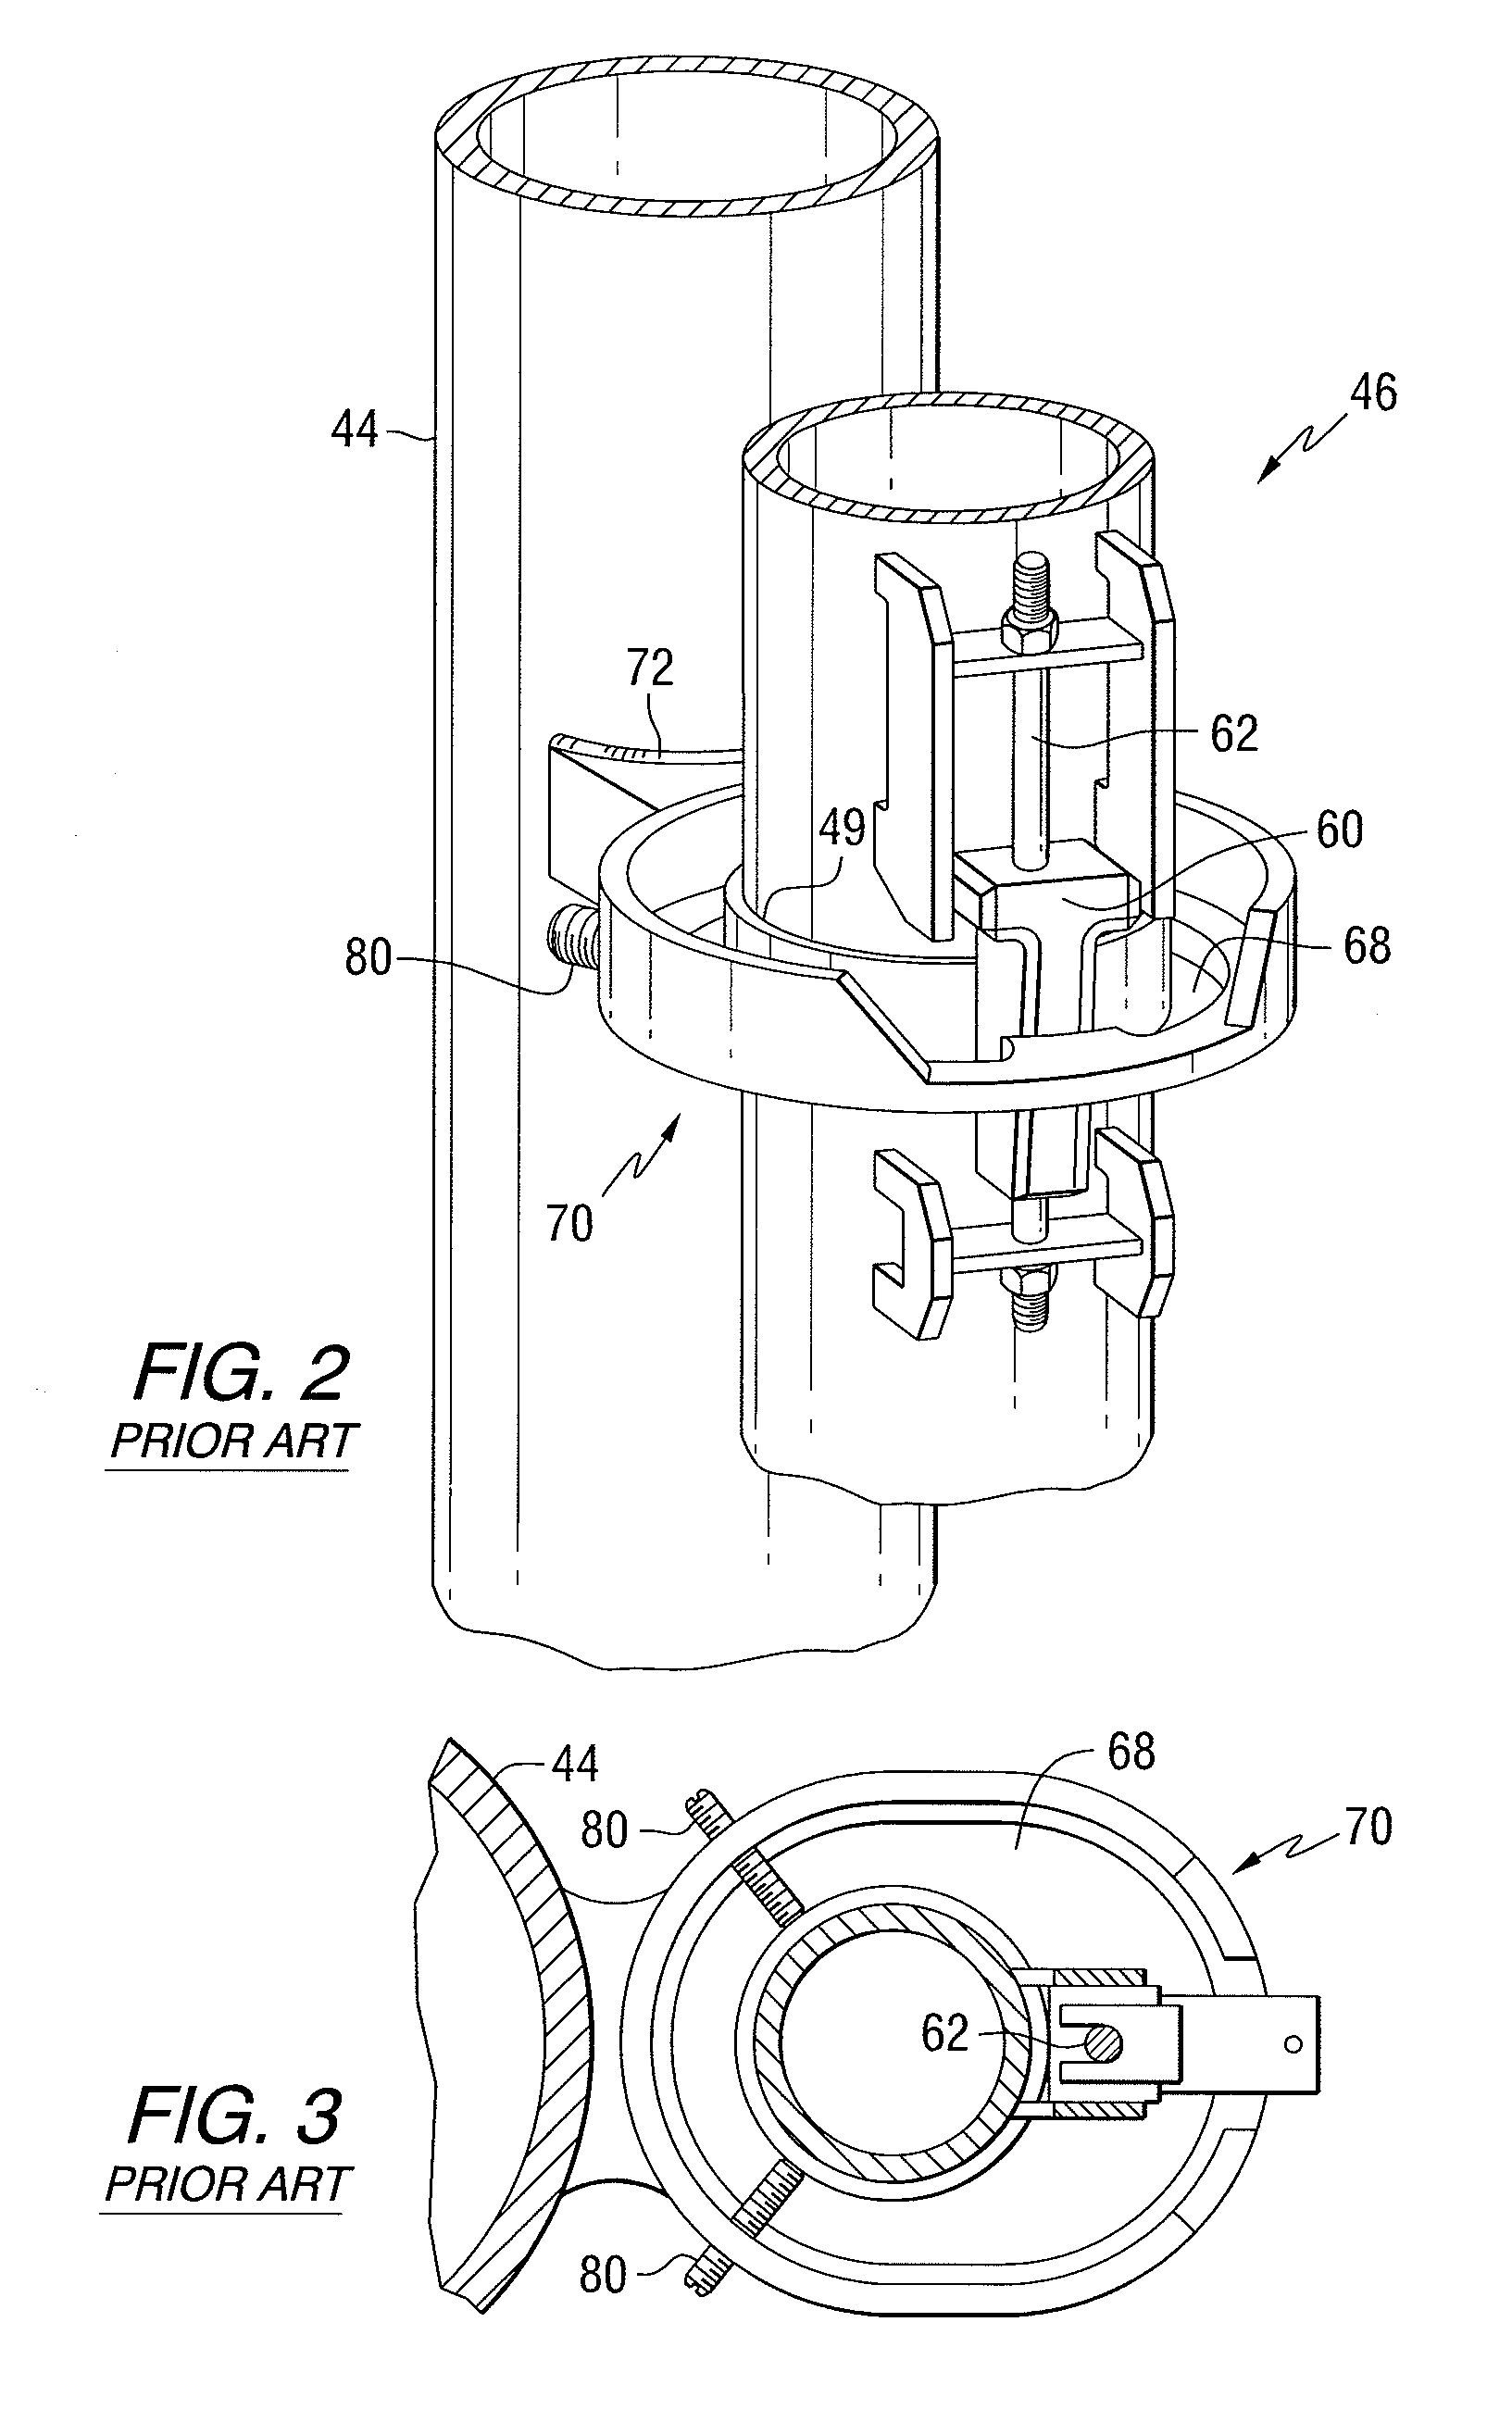 Wedge positioning apparatus for jet pump assemblies in nuclear reactors